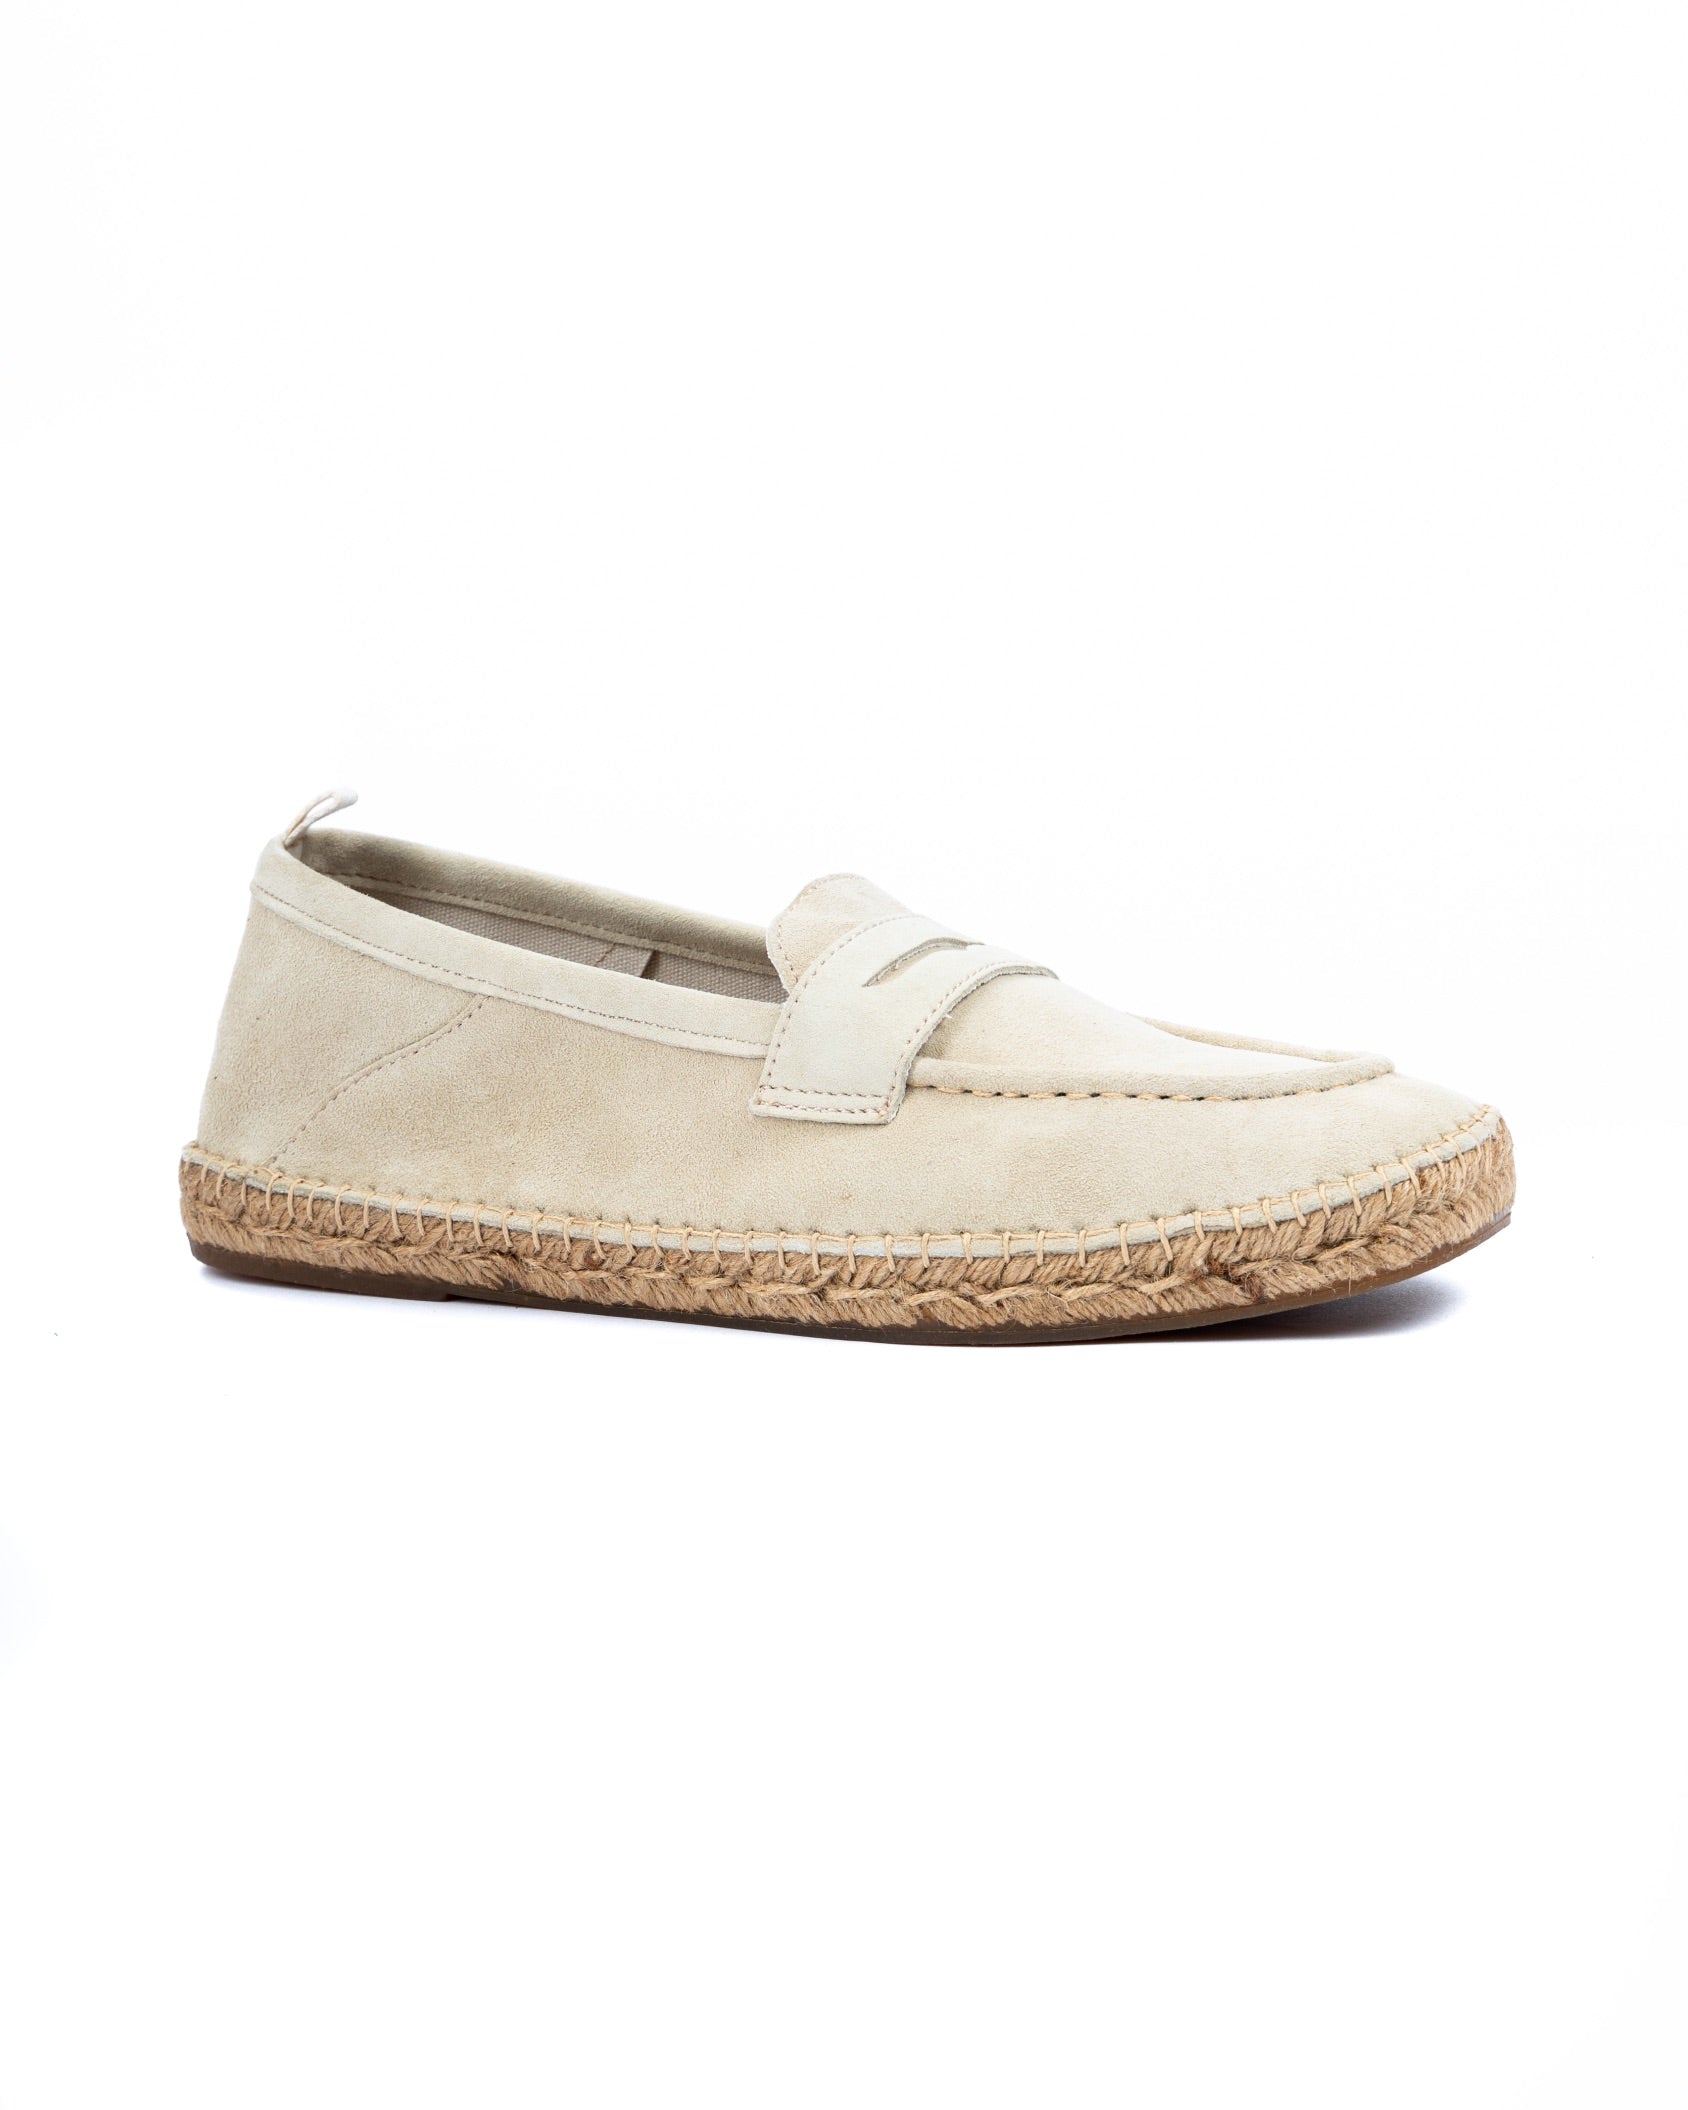 Roma - cream suede moccasin with rope sole